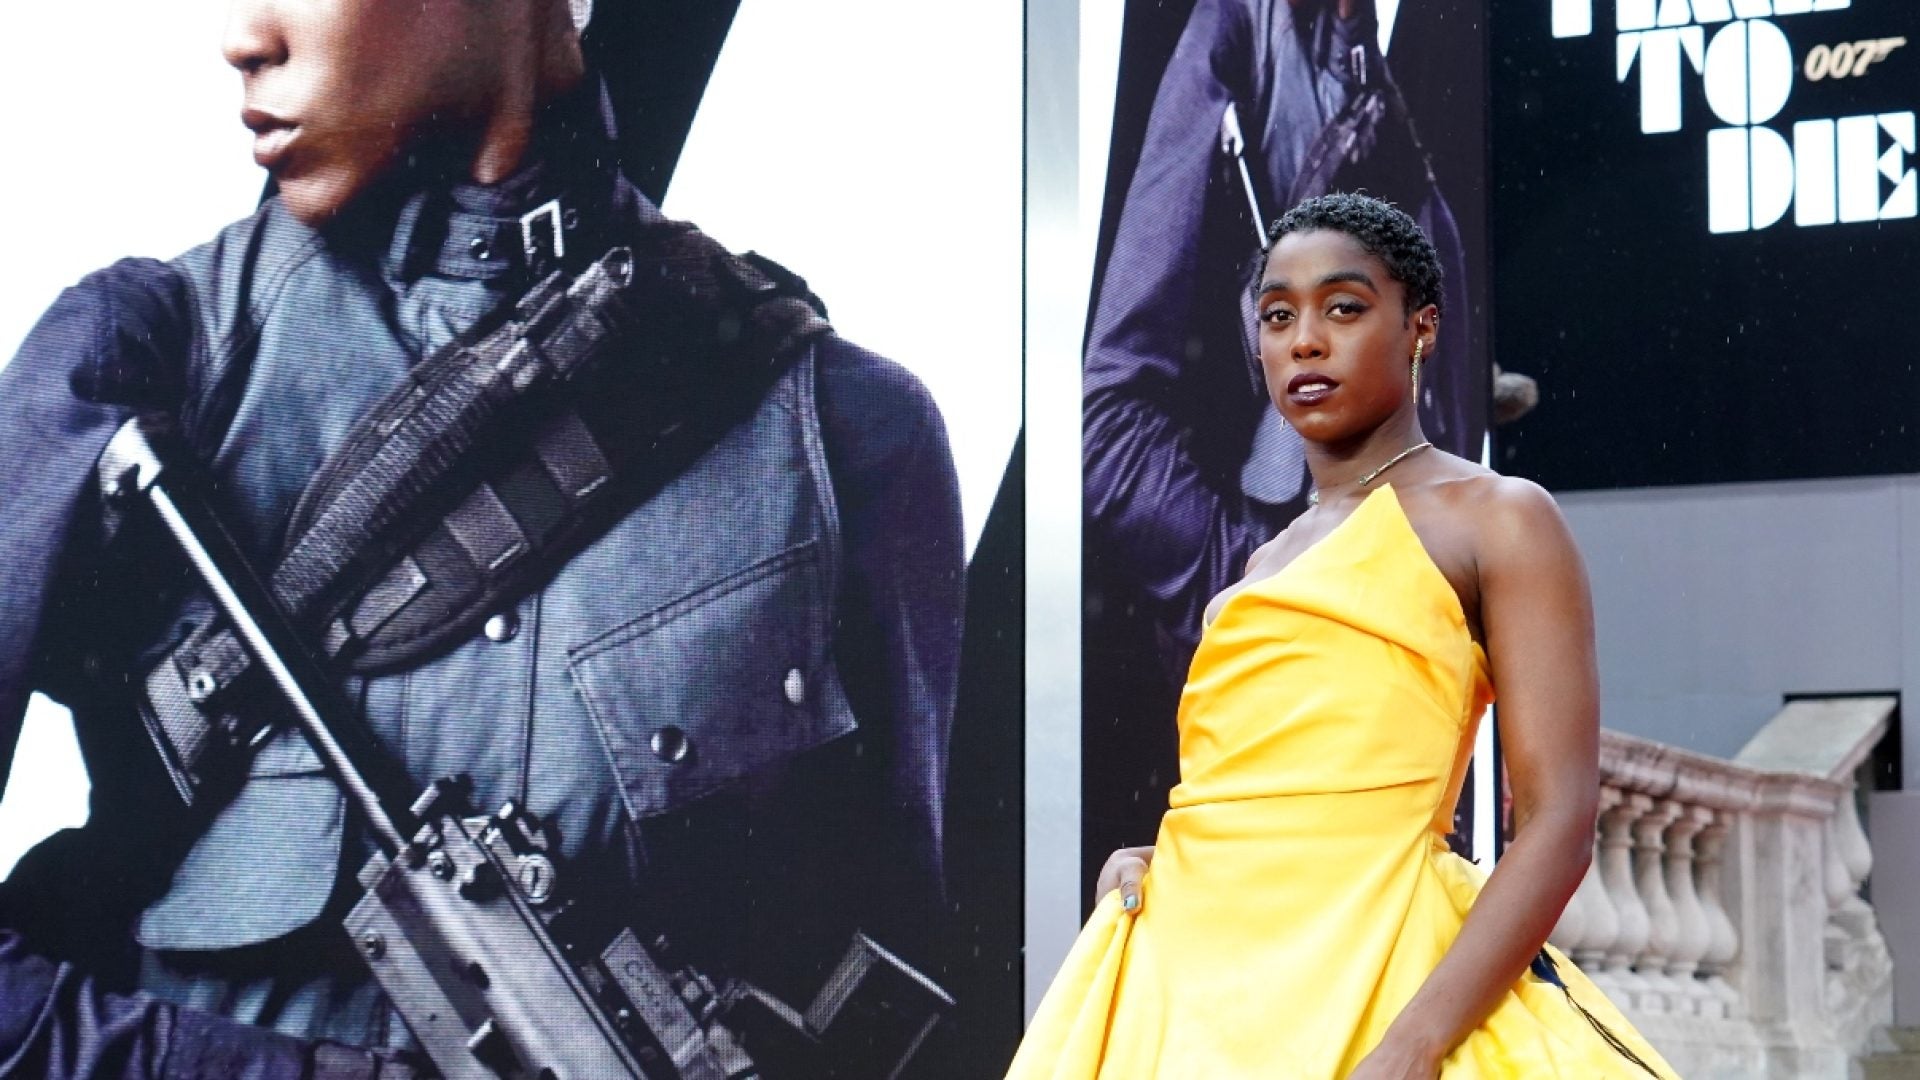 Lashana Lynch On Not Being A Stereotype In New James Bond Film 'No Time To Die'